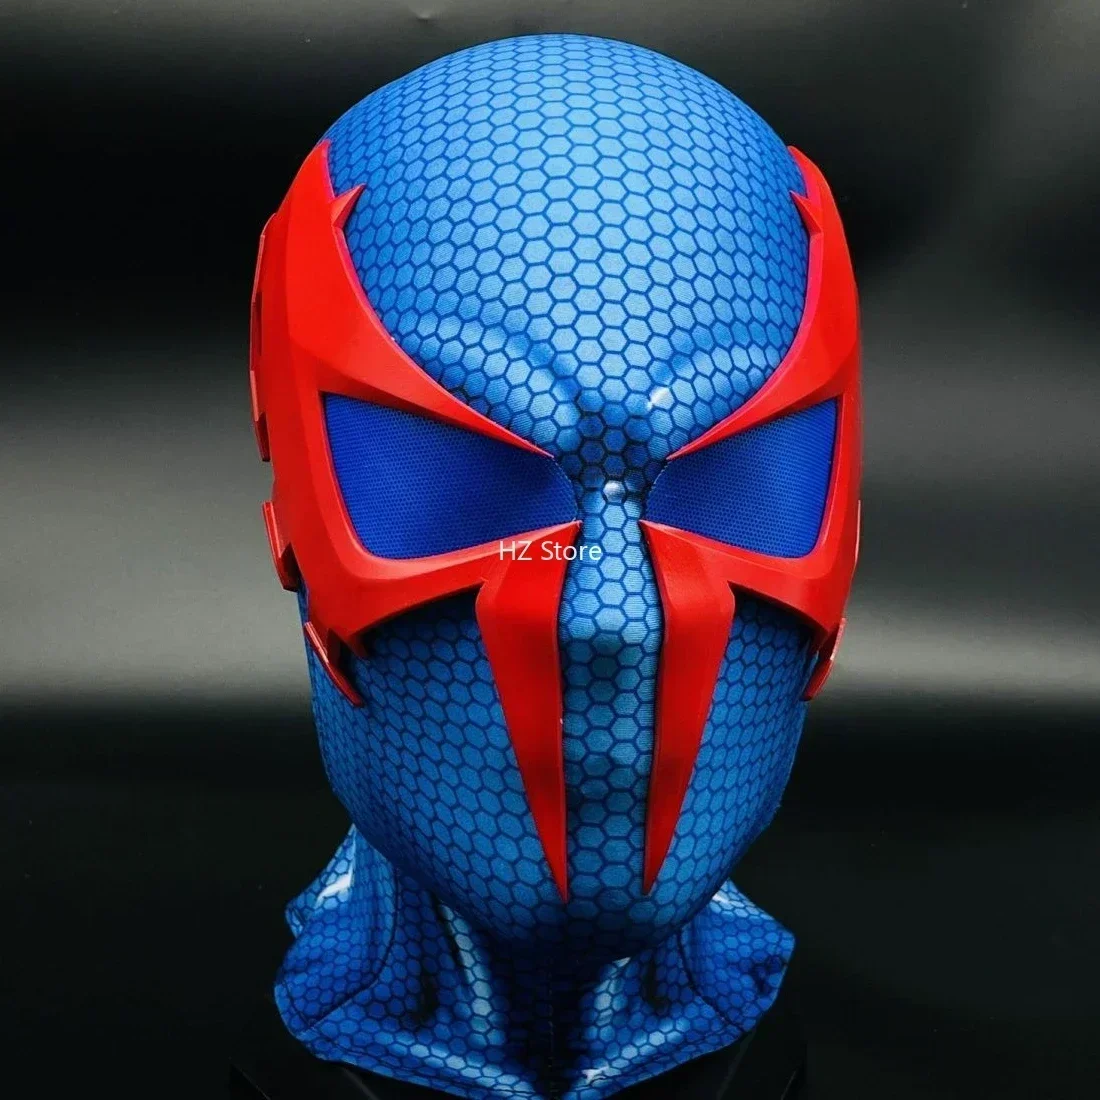 Marvel The Amazing Spider-Man Mask with Faceshell & Magnetic Lenses 1:1 3D  Handmade Spiderman Mask Cosplay Replica for Gift - AliExpress